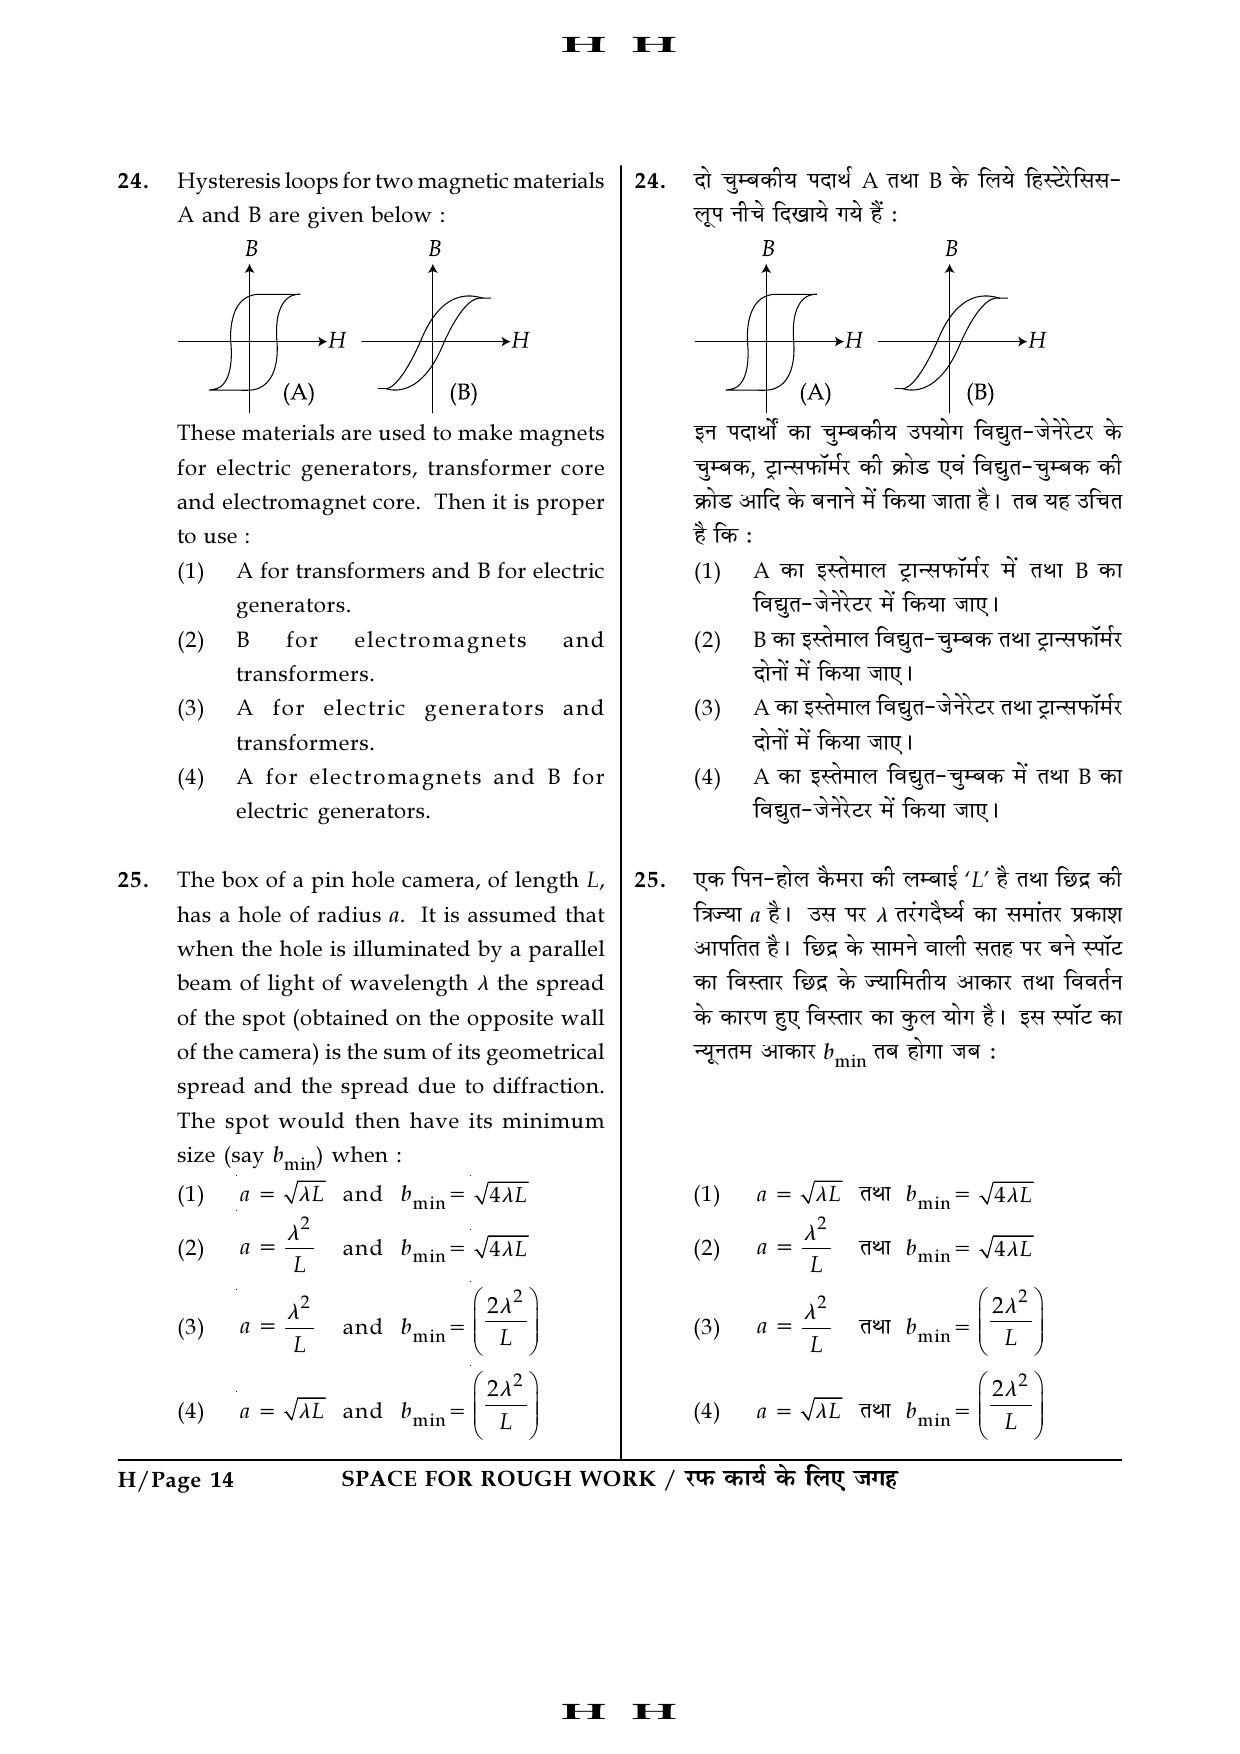 JEE Main Exam Question Paper 2016 Booklet H 14